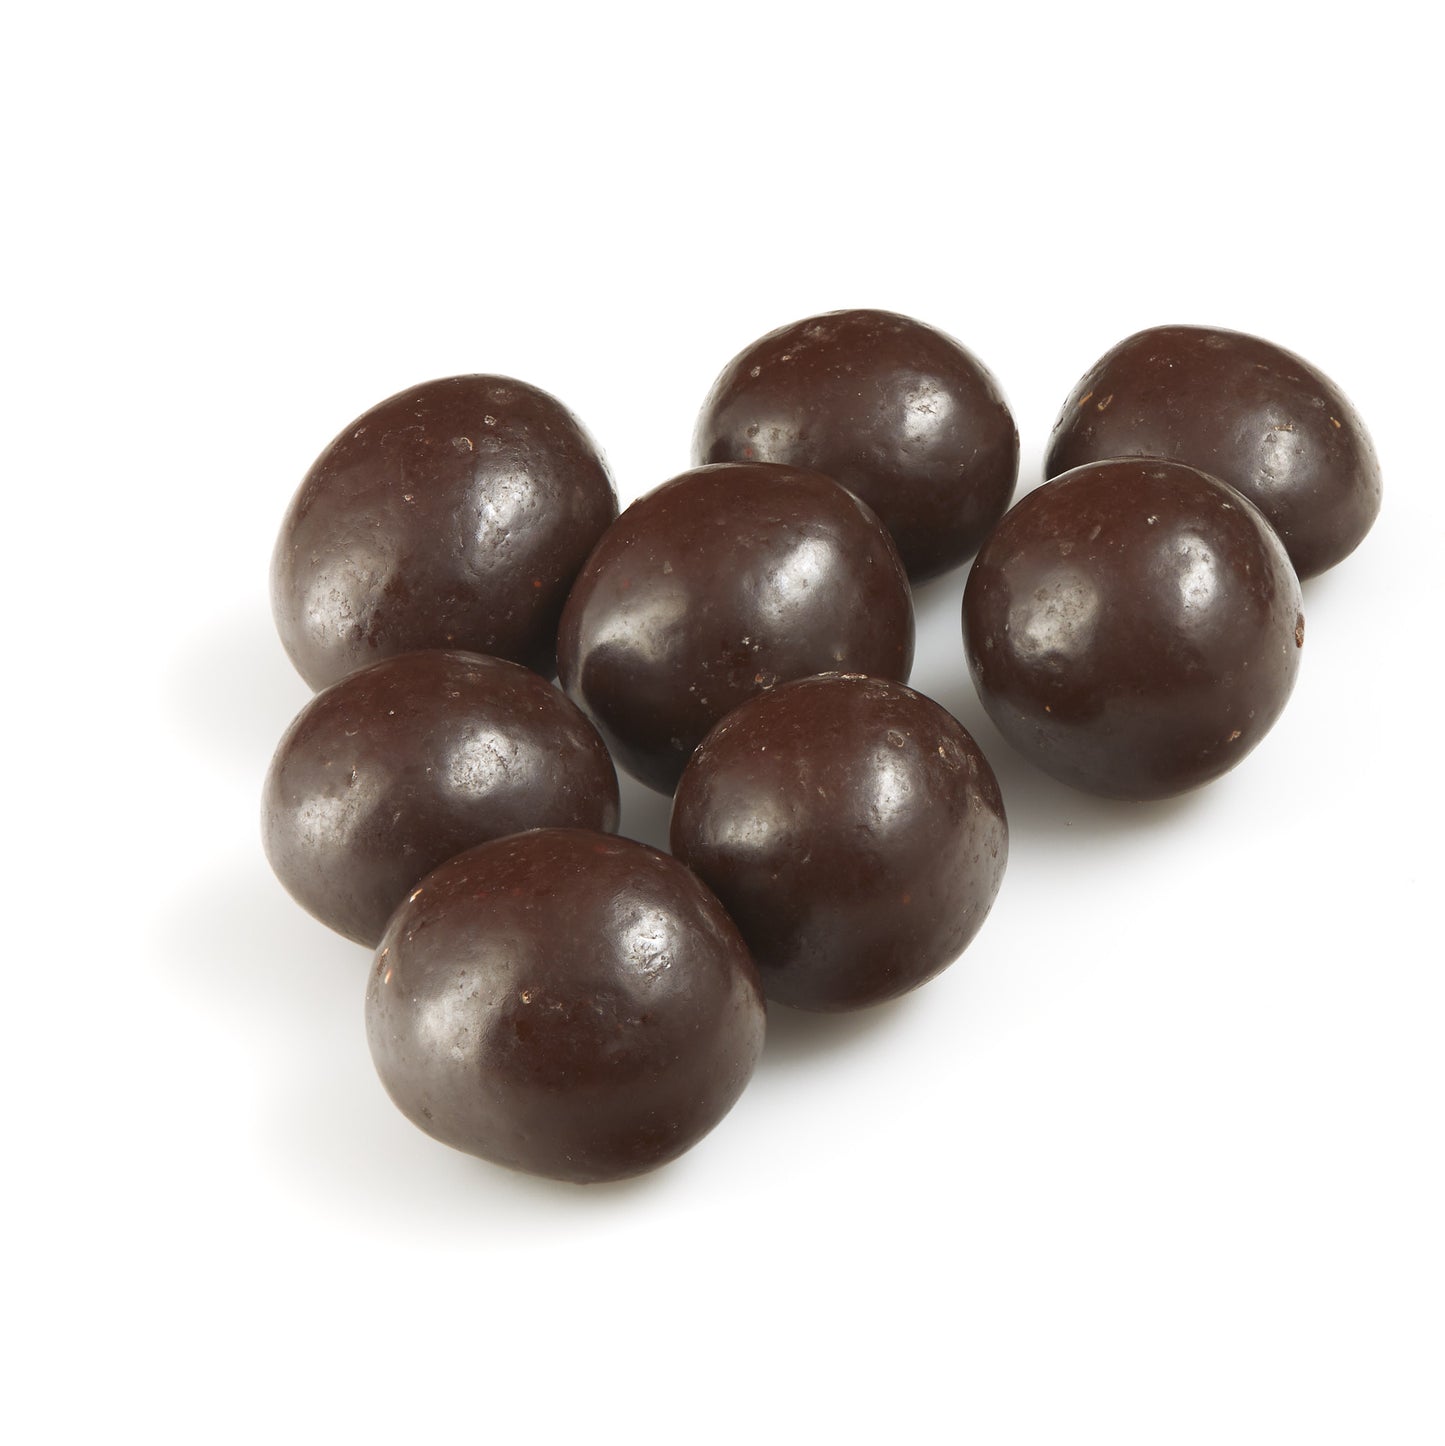 Chocolate Covered Cookie Bites